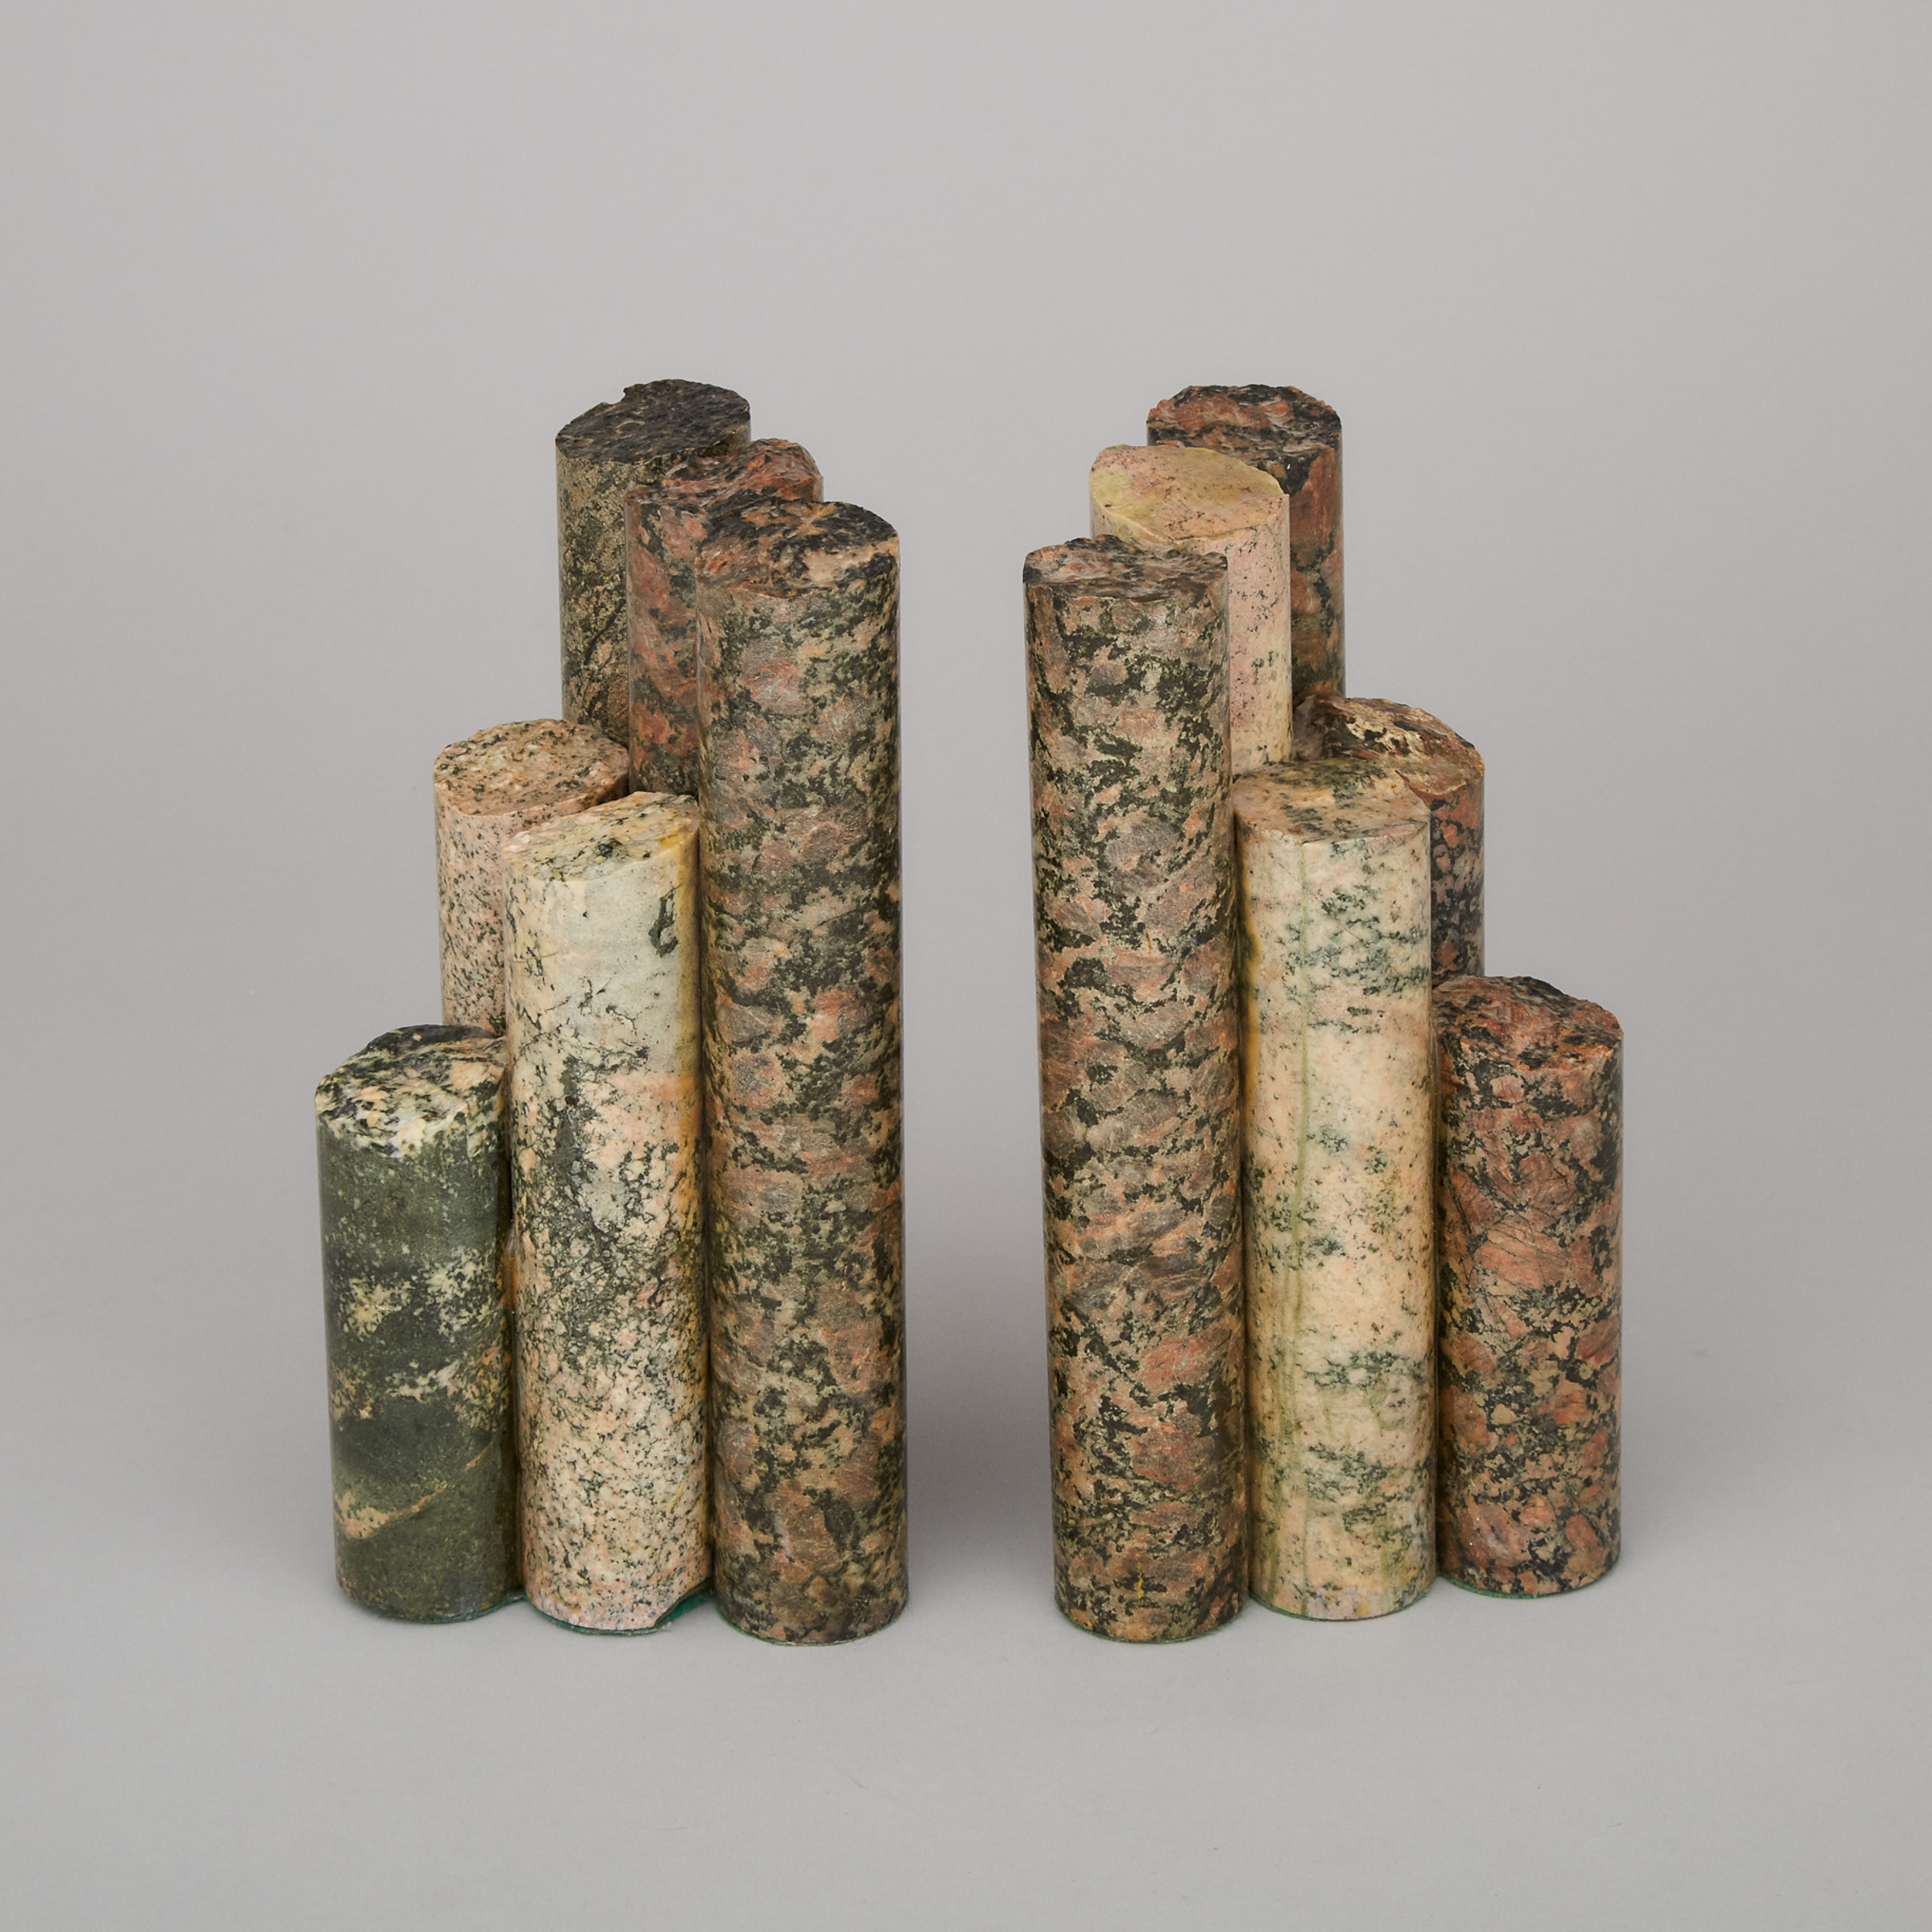 Pair of Canadian Shield Core Sample Bookends, mid 20th century